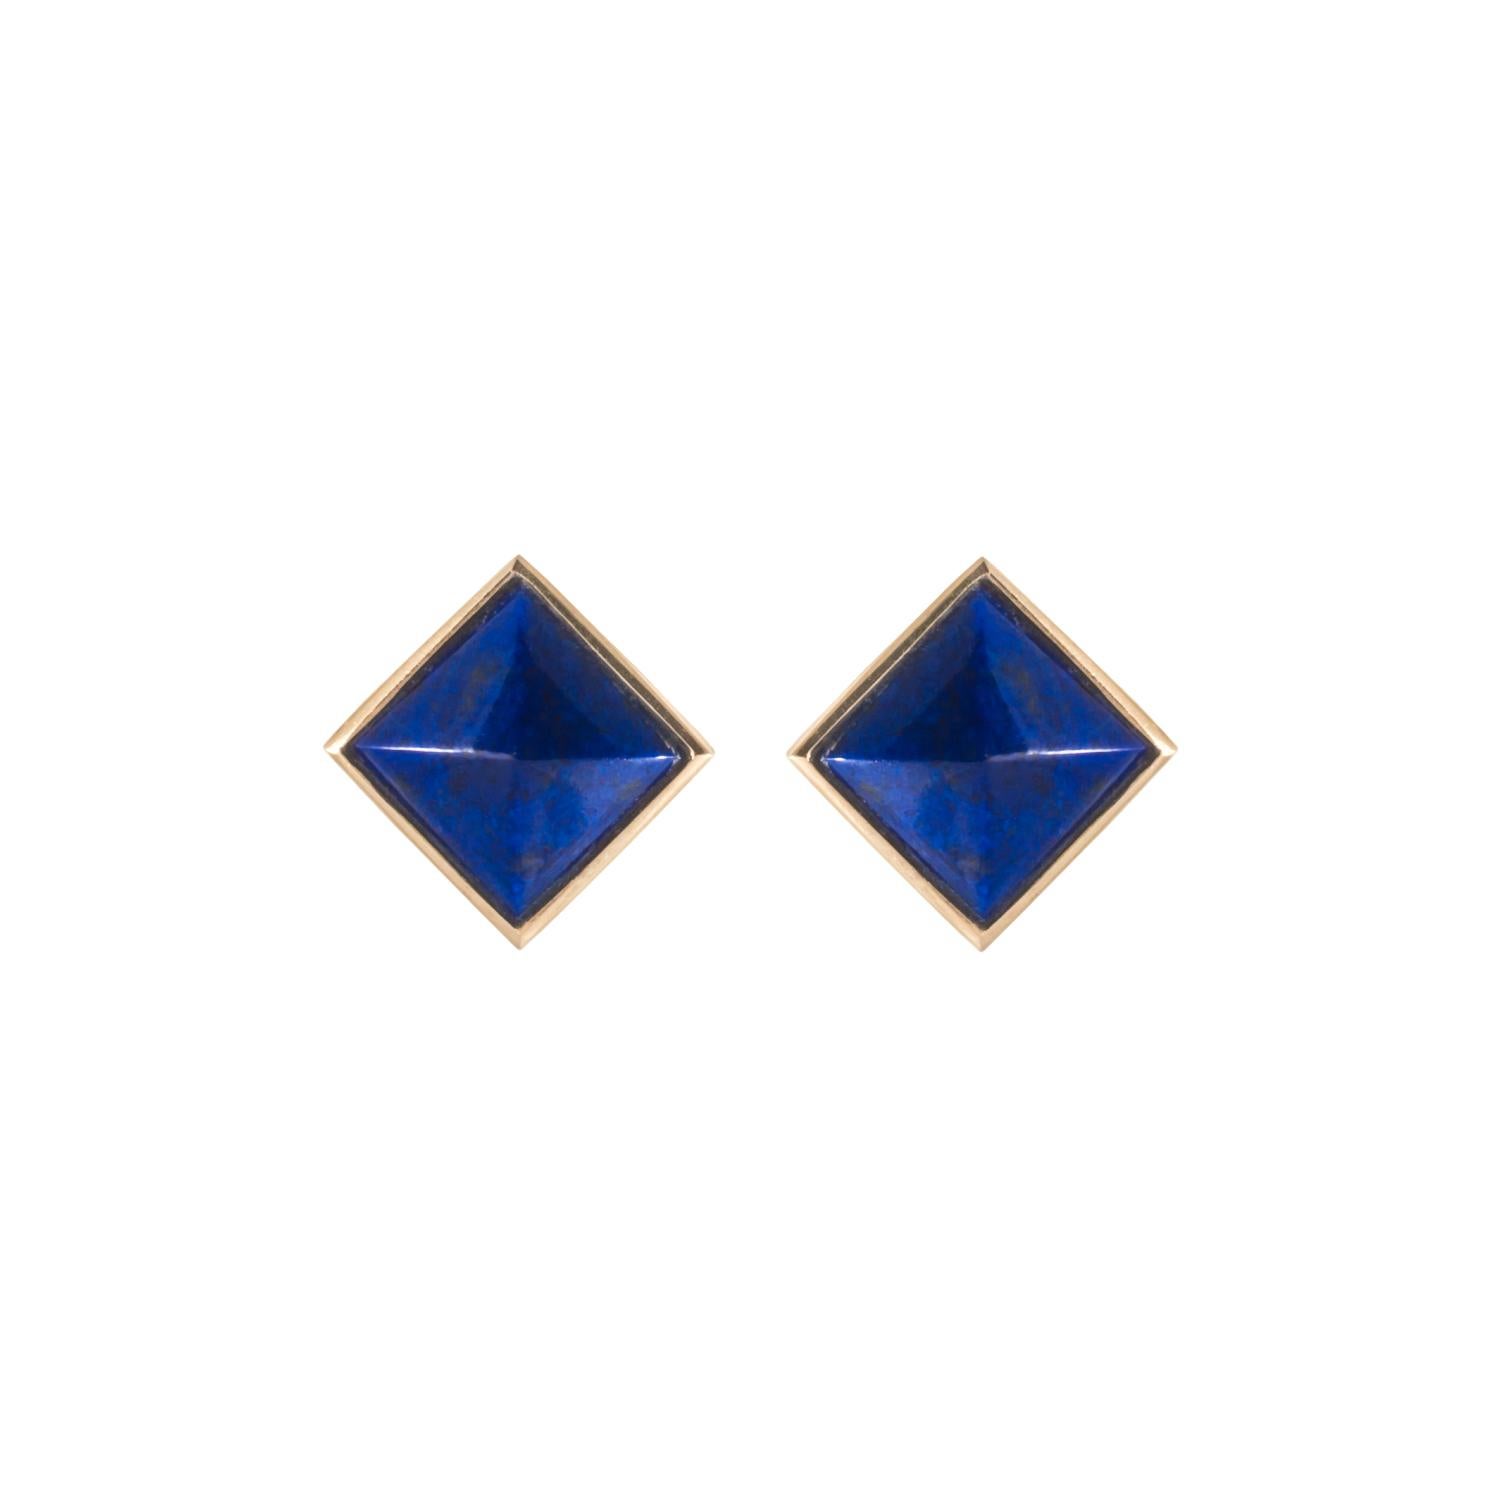 Lapis Lazuli on Yellow Gold. Earrings of 8mm (0.31 inches) . HAND CARVED STONES made from a specific unique designed. HANDCRAFTED IN FRANCE. The Designer, Bénédicte, decided to Produce all her Creations in her Country of Origin, France, to Honor and